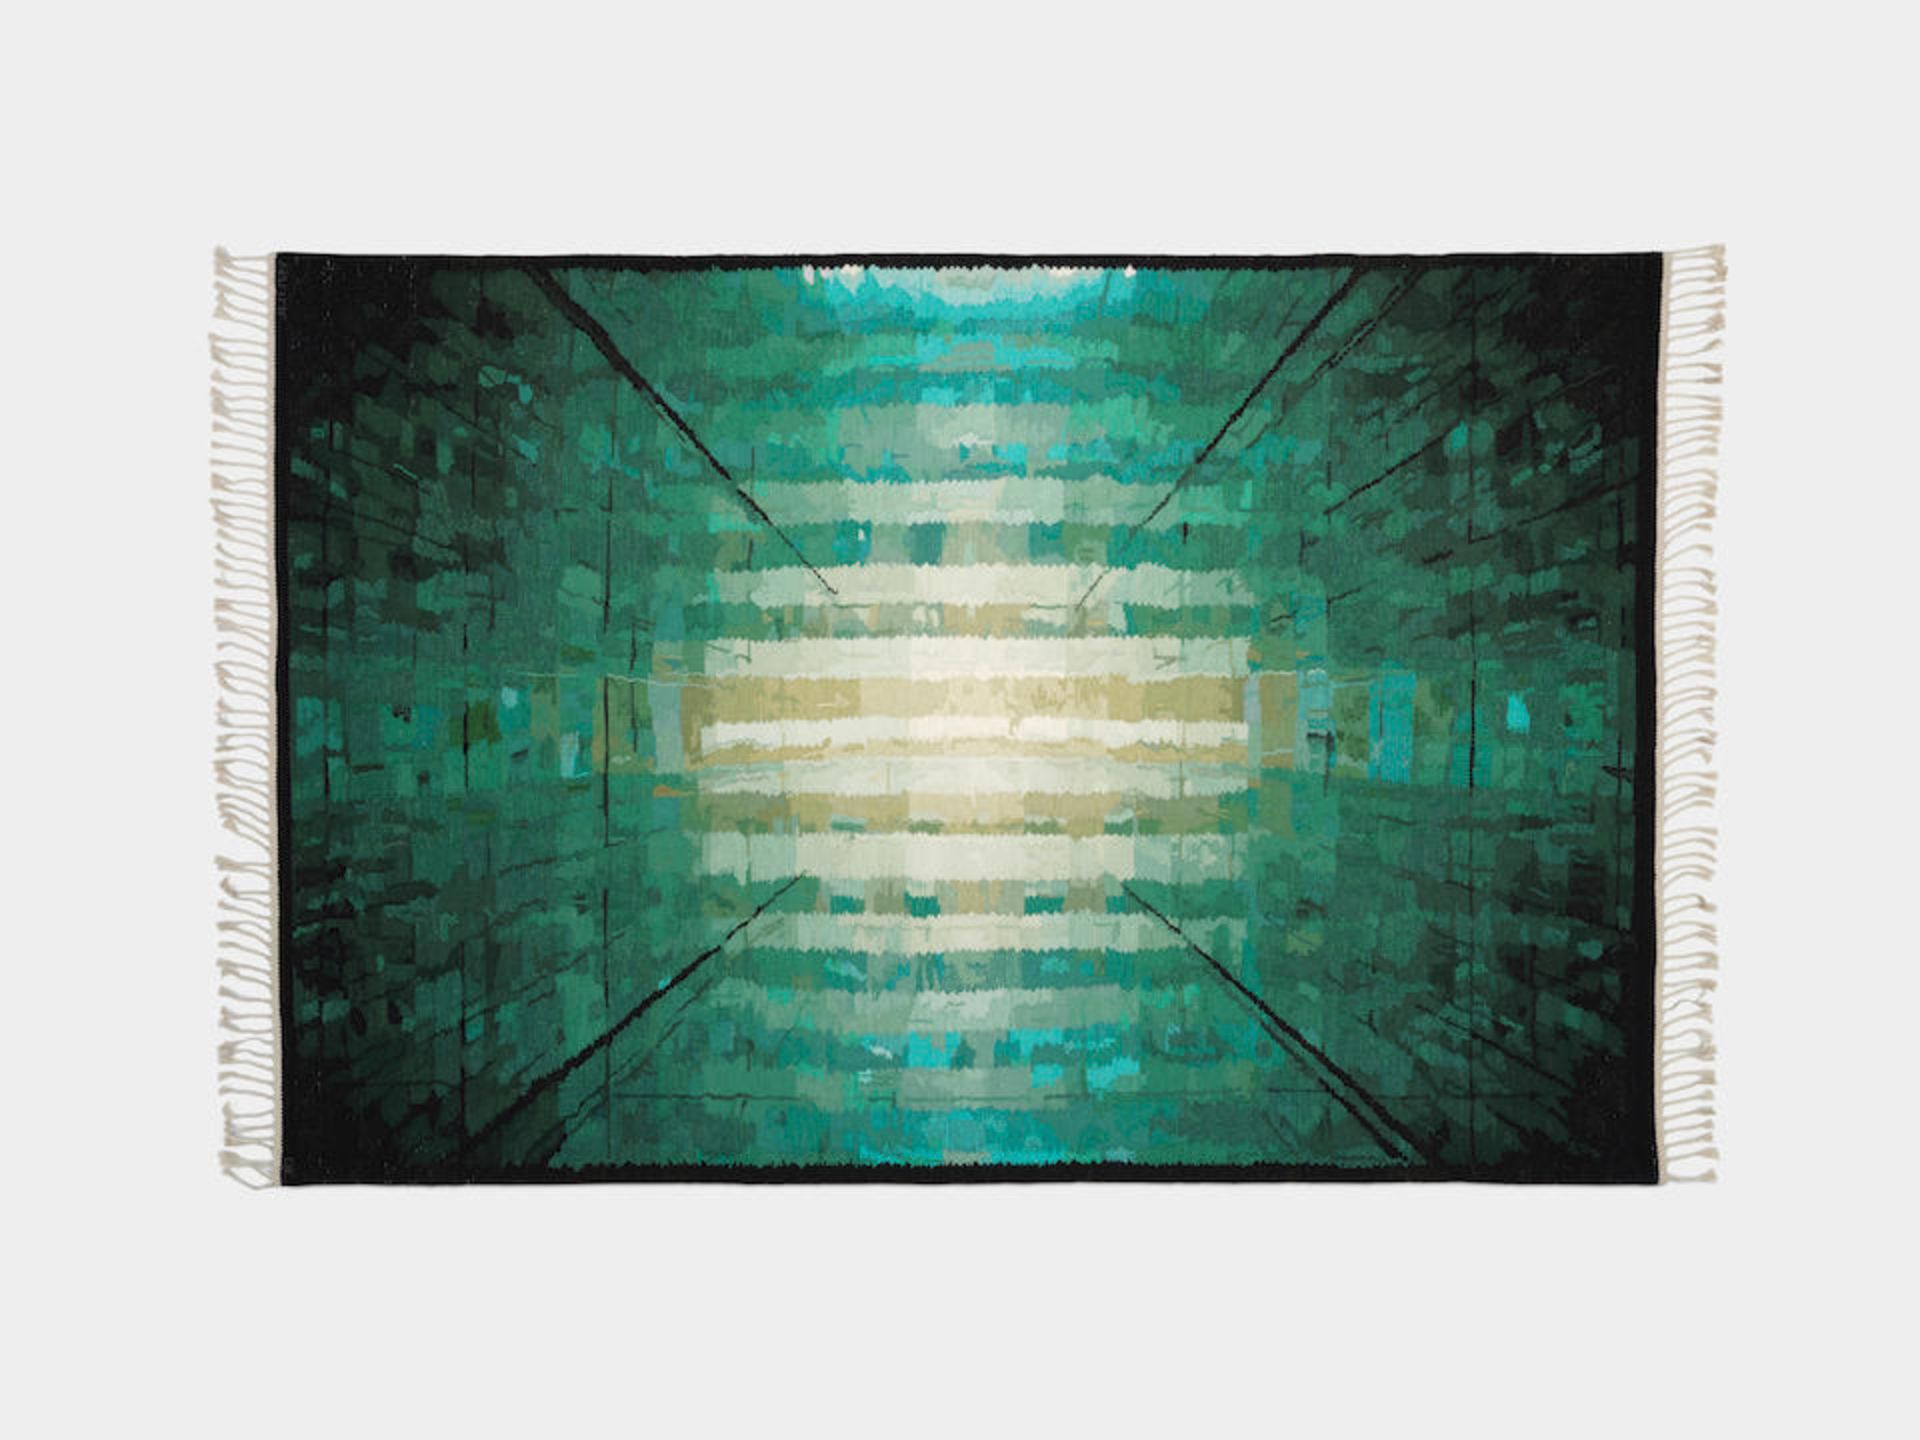 Olafur Eliasson 'The Green Glass Carpet', produced for 'The Textile Art of the Year for Mär...